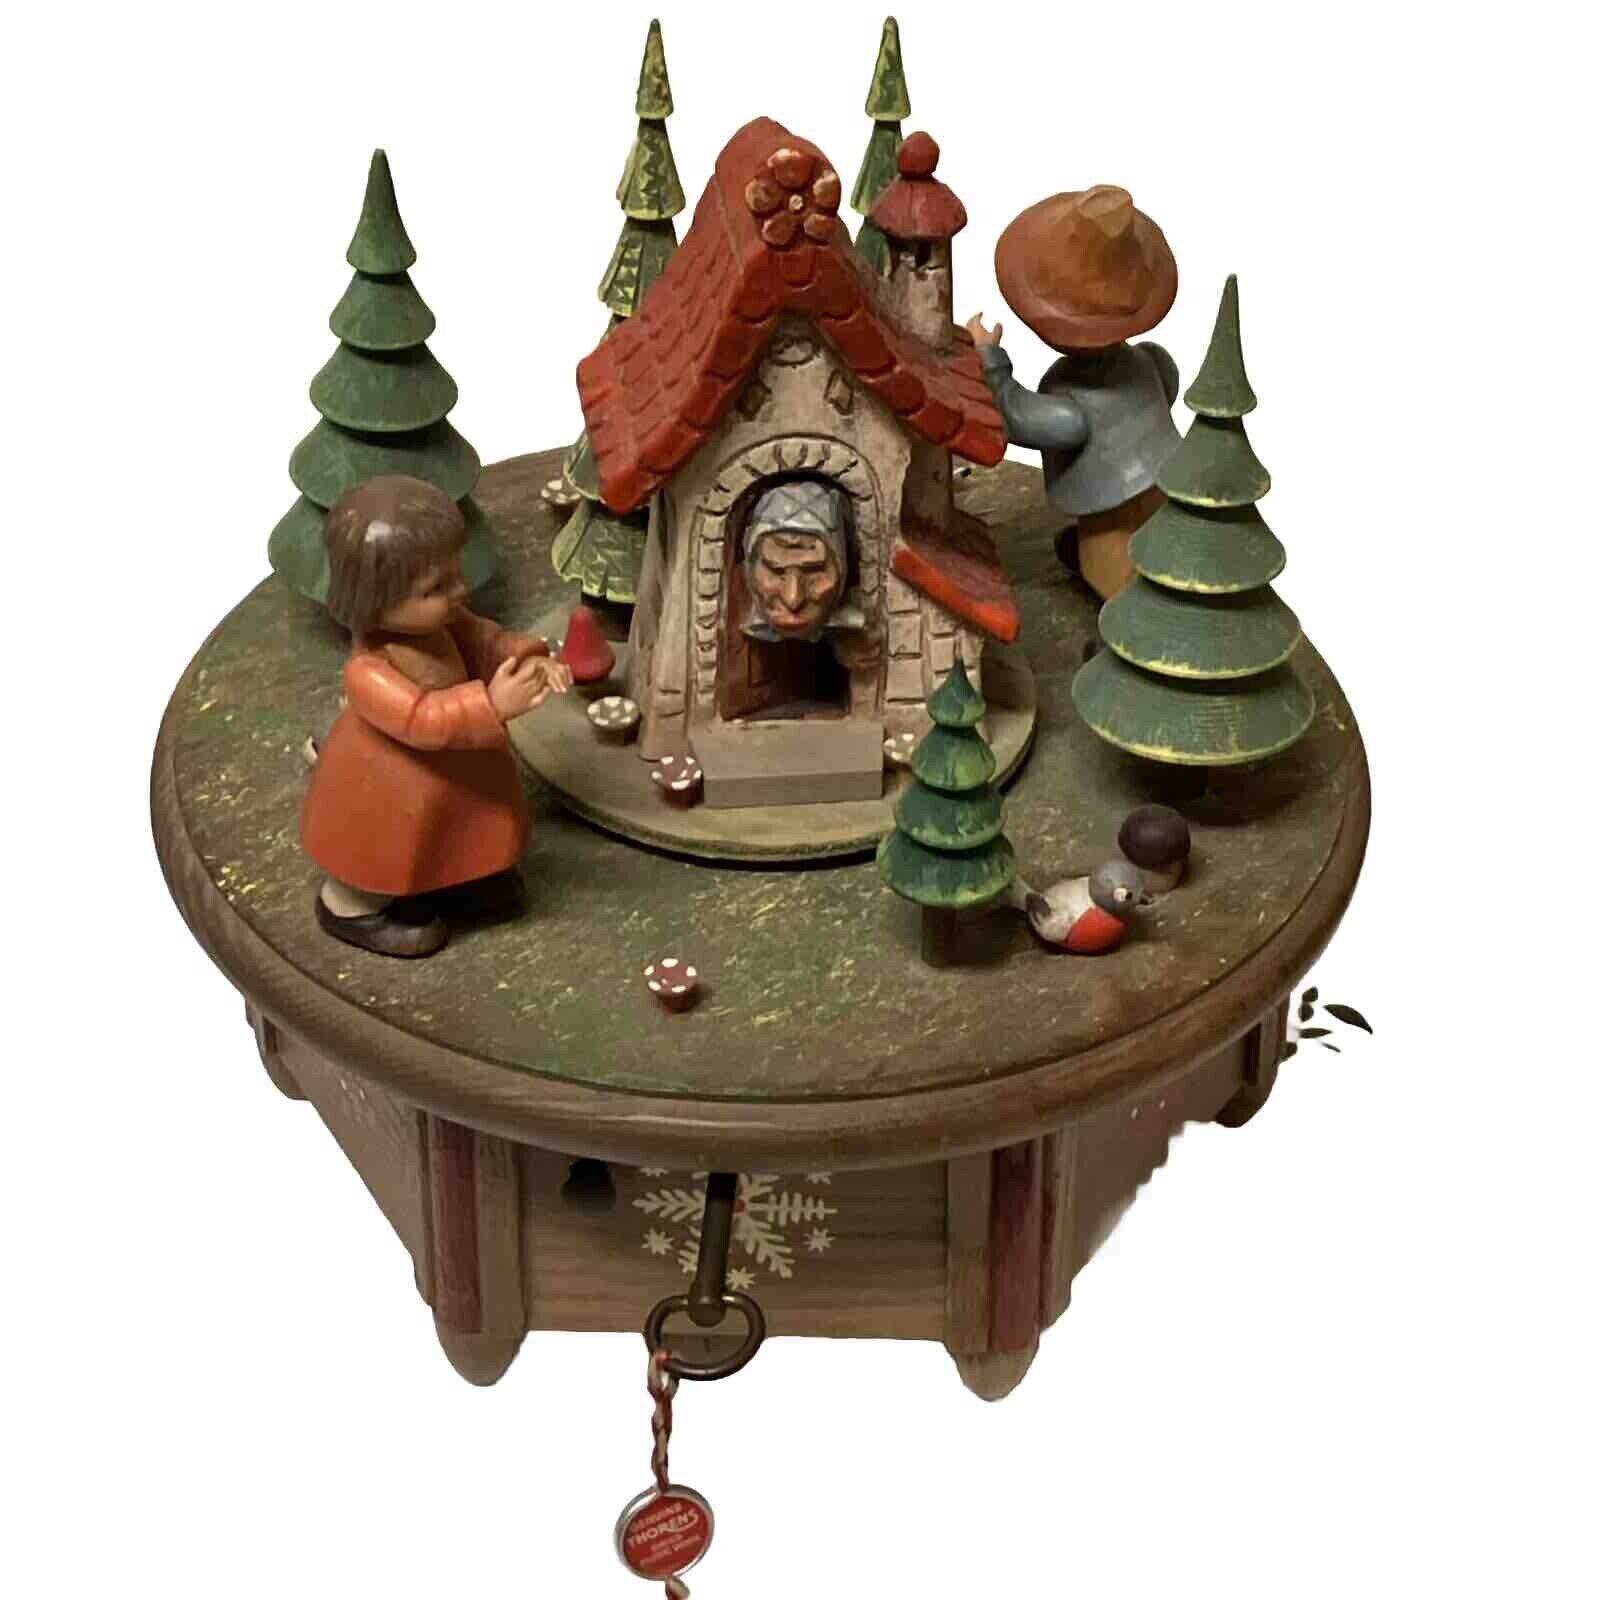 VTG Thorens Wood Craft Hansel & Gretel & WITCH Music Box “Moon River” AS IS RARE